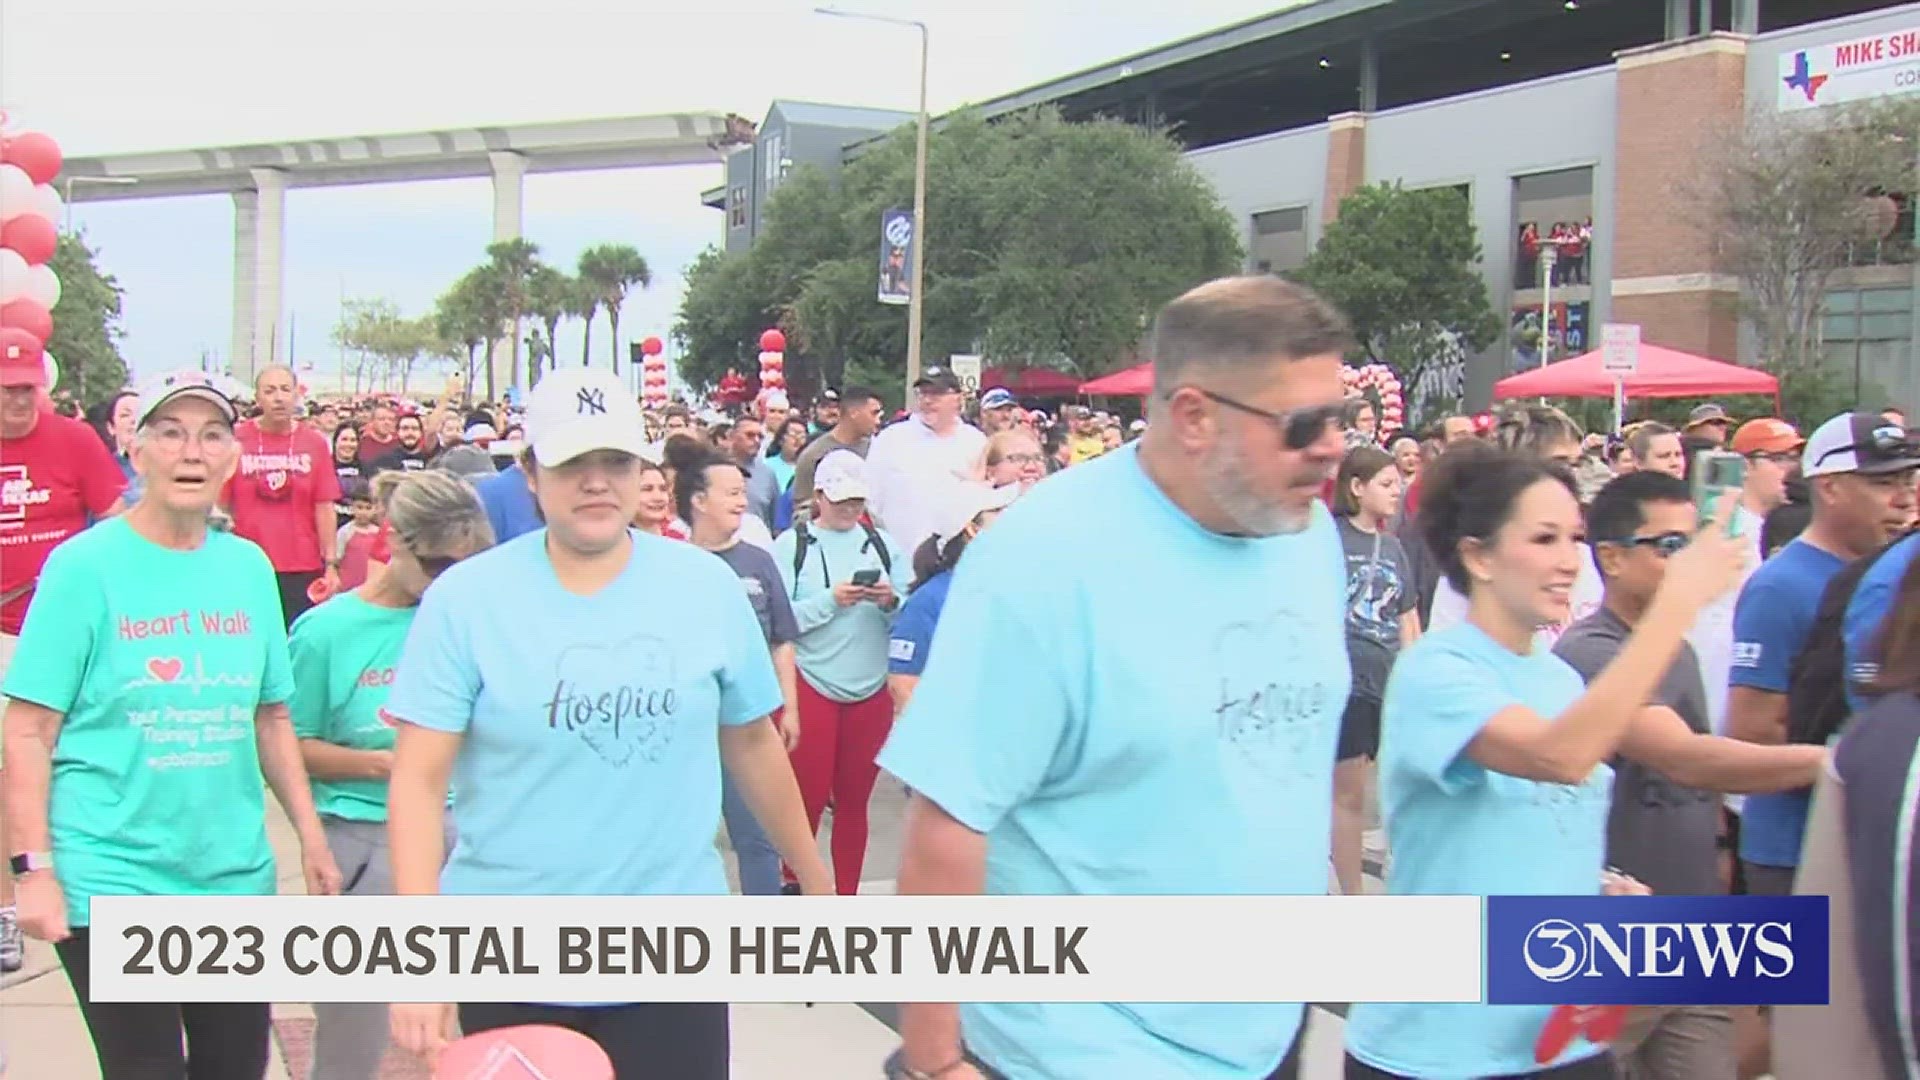 The annual walk is held to spread awareness of heart disease and encourage better health.